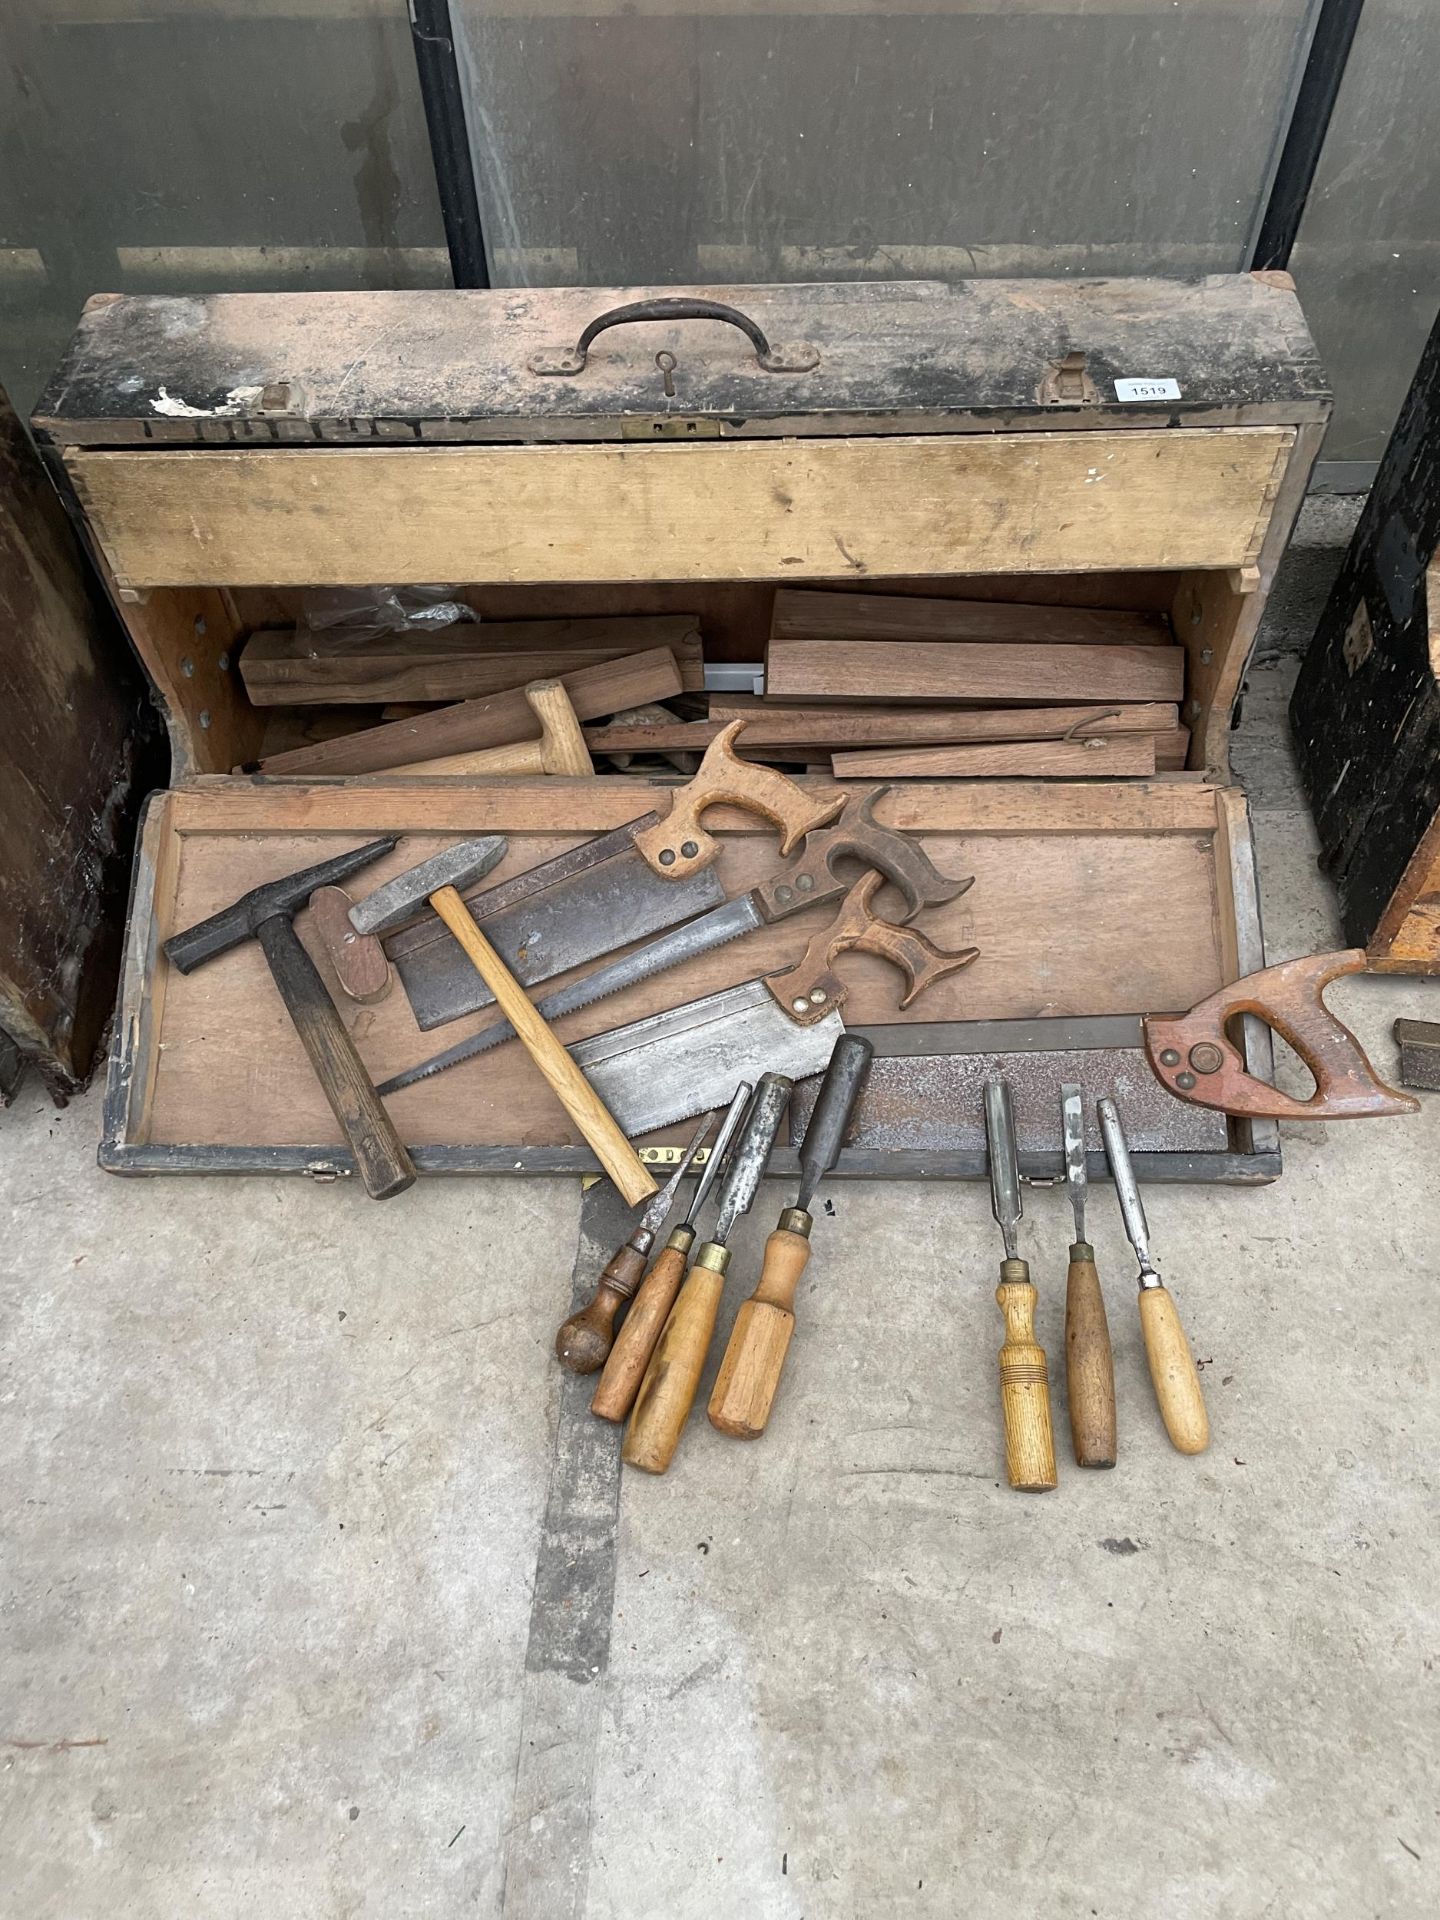 A VINTAGE WOODEN JOINERS CHEST WITH AN ASSORTMENT OF TOOLS TO INCLUDE LATHE CHISELS, SAWS AND